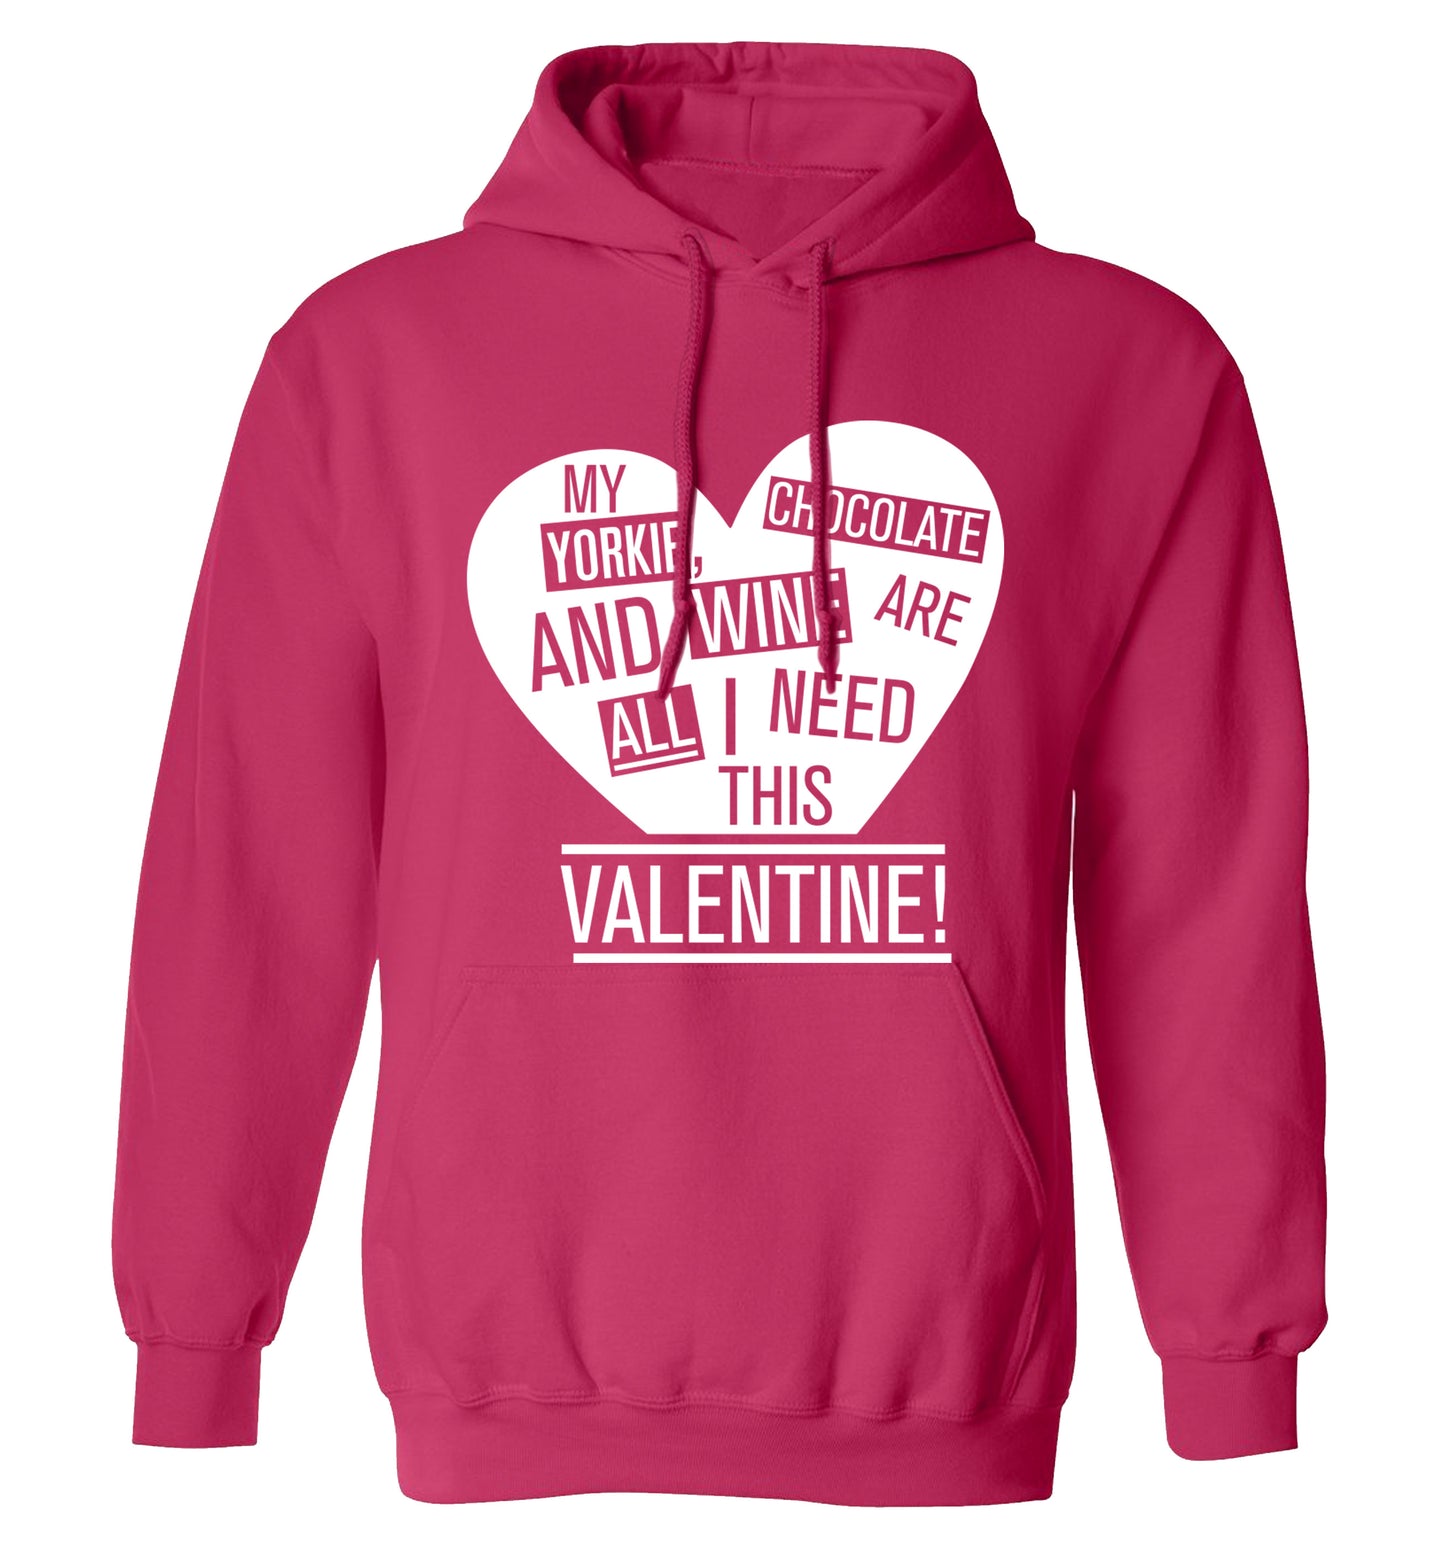 My yorkie, chocolate and wine are all I need this valentine! adults unisex pink hoodie 2XL